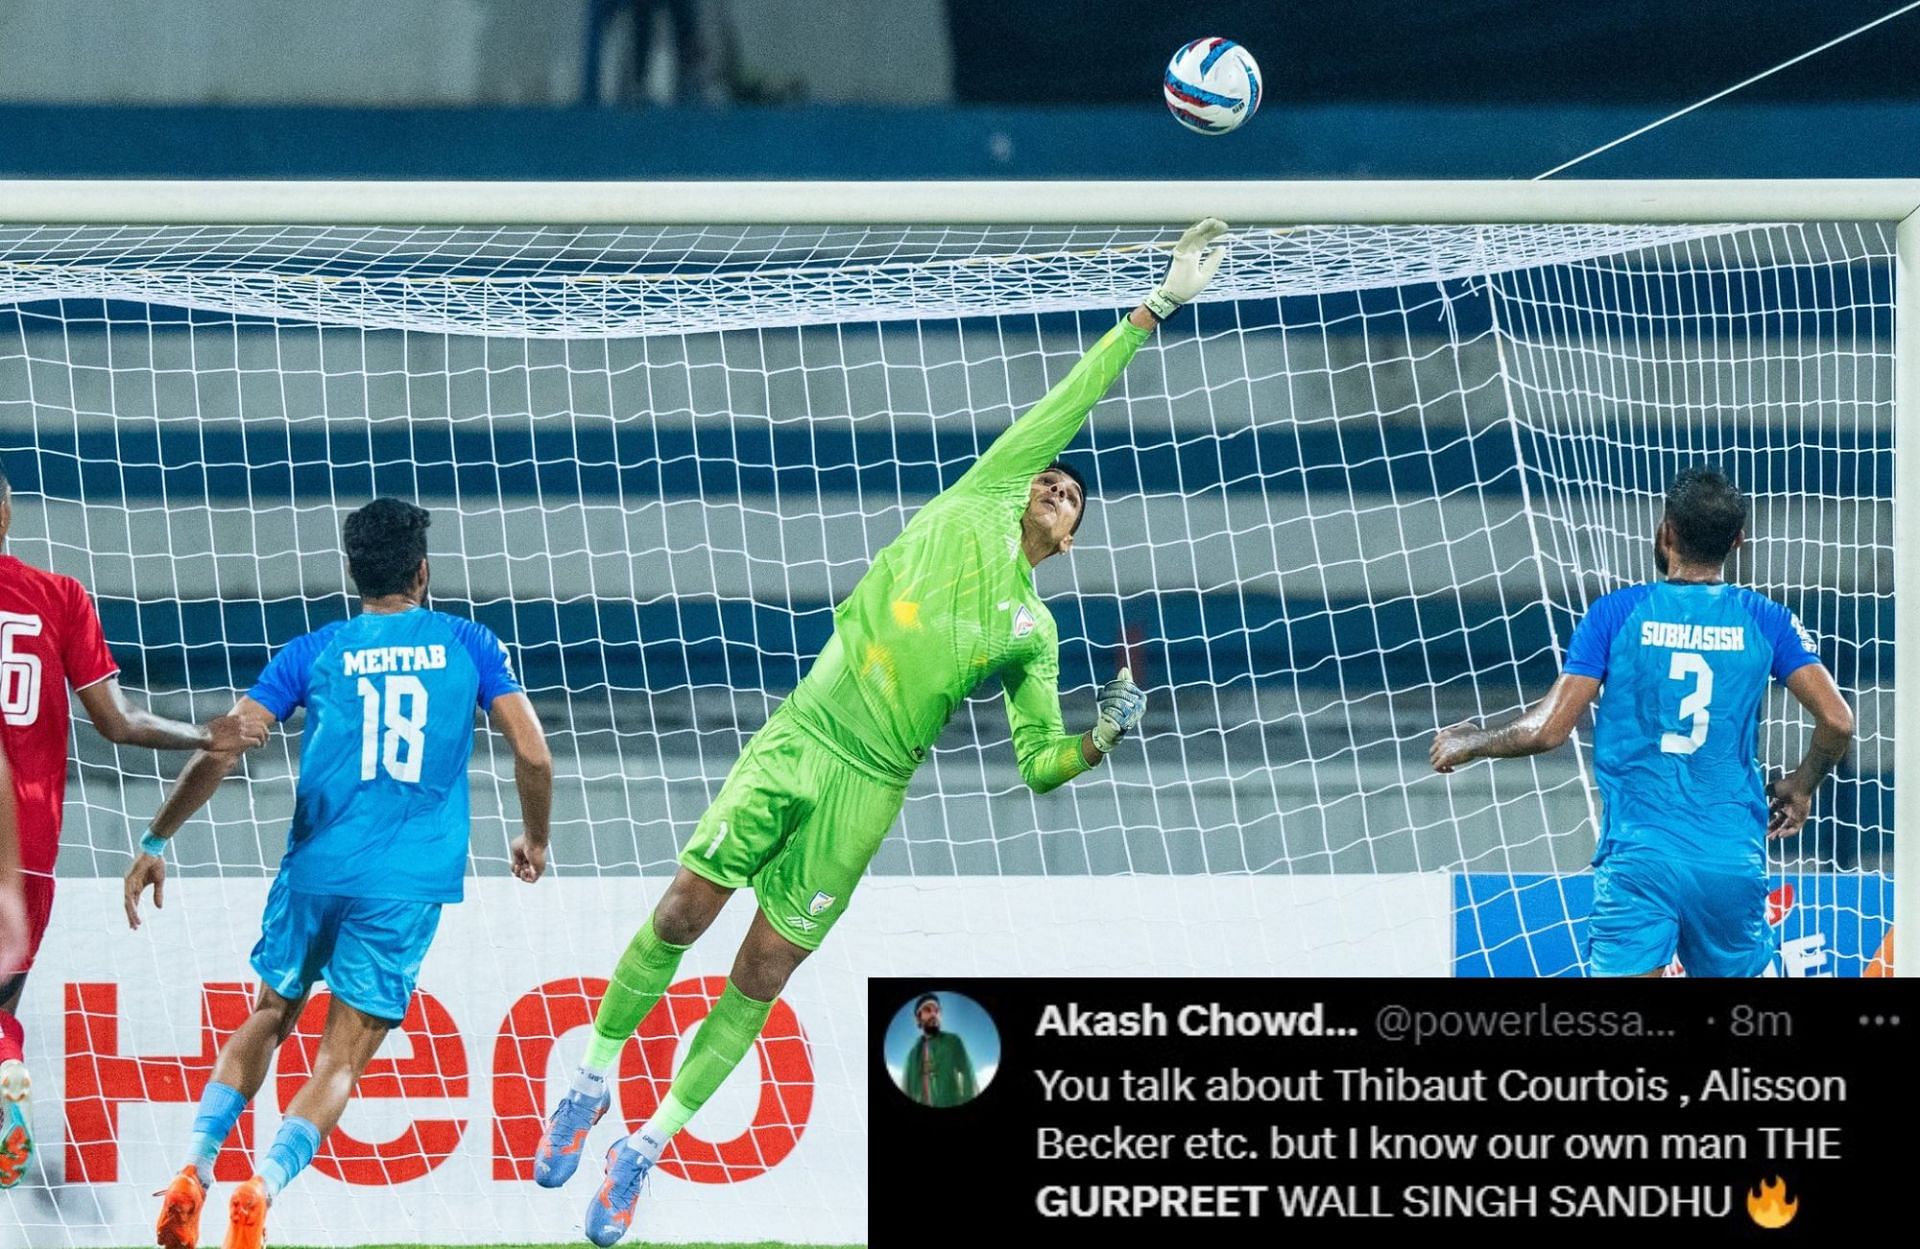 Gurpreet Singh Sandhu made two crucial stops against Lebanon in the first half.